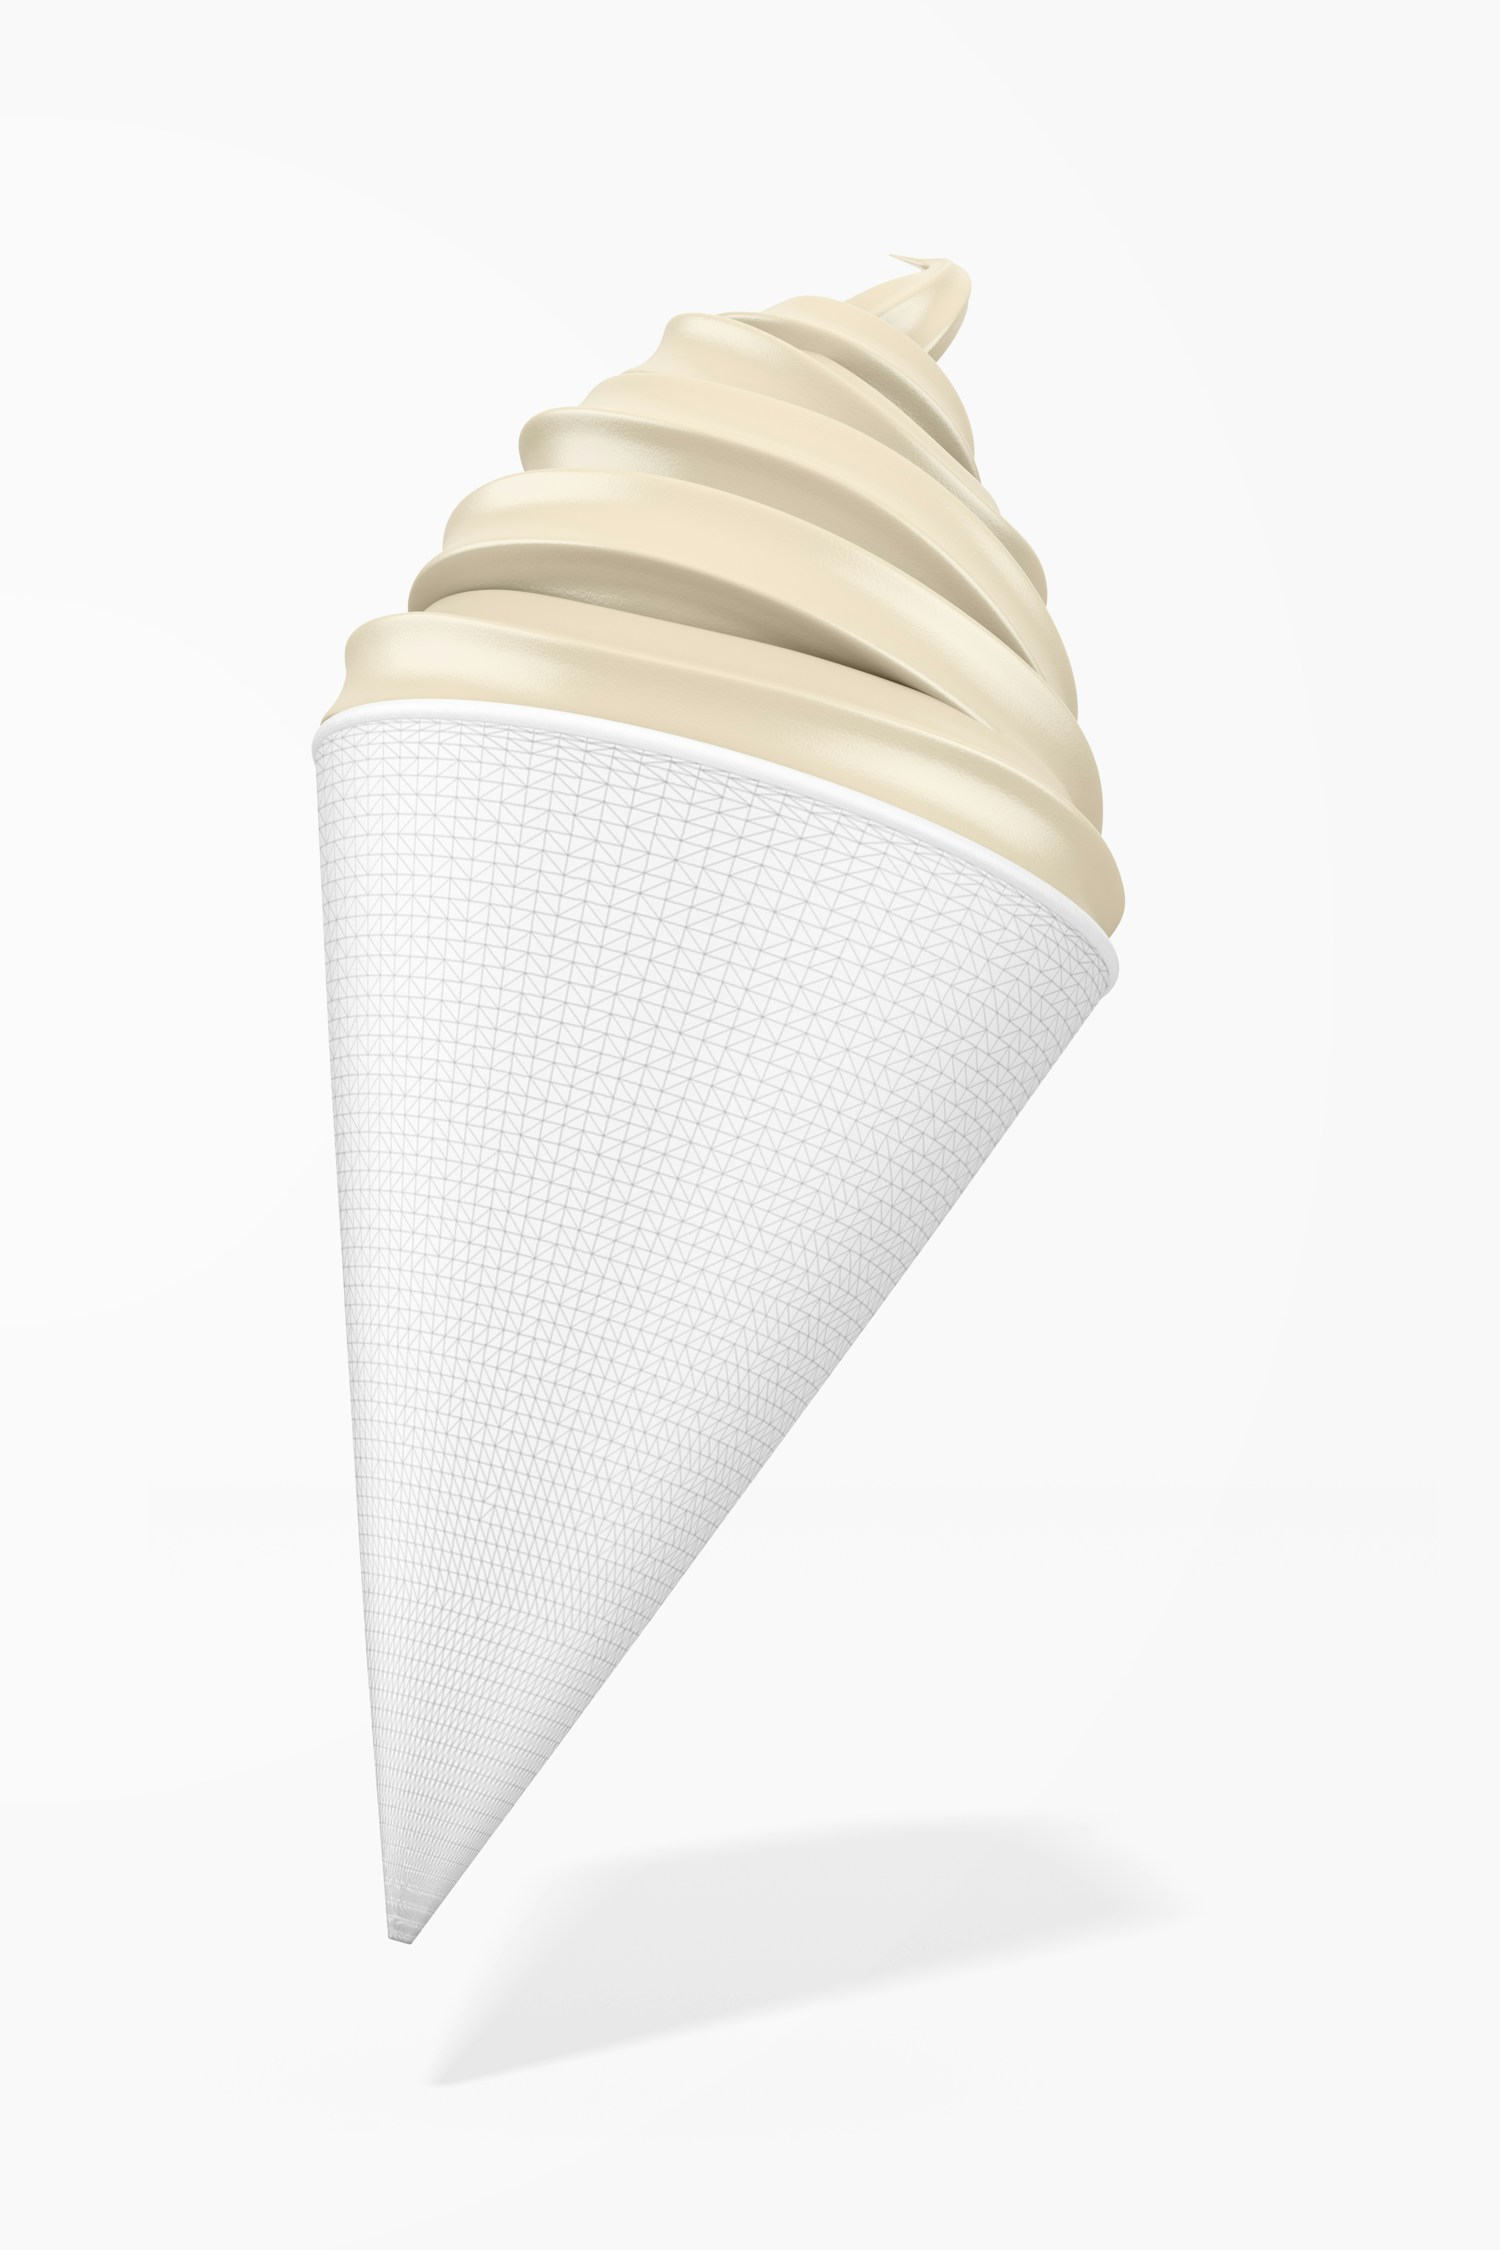 Cone Paper Cup Mockup, Falling